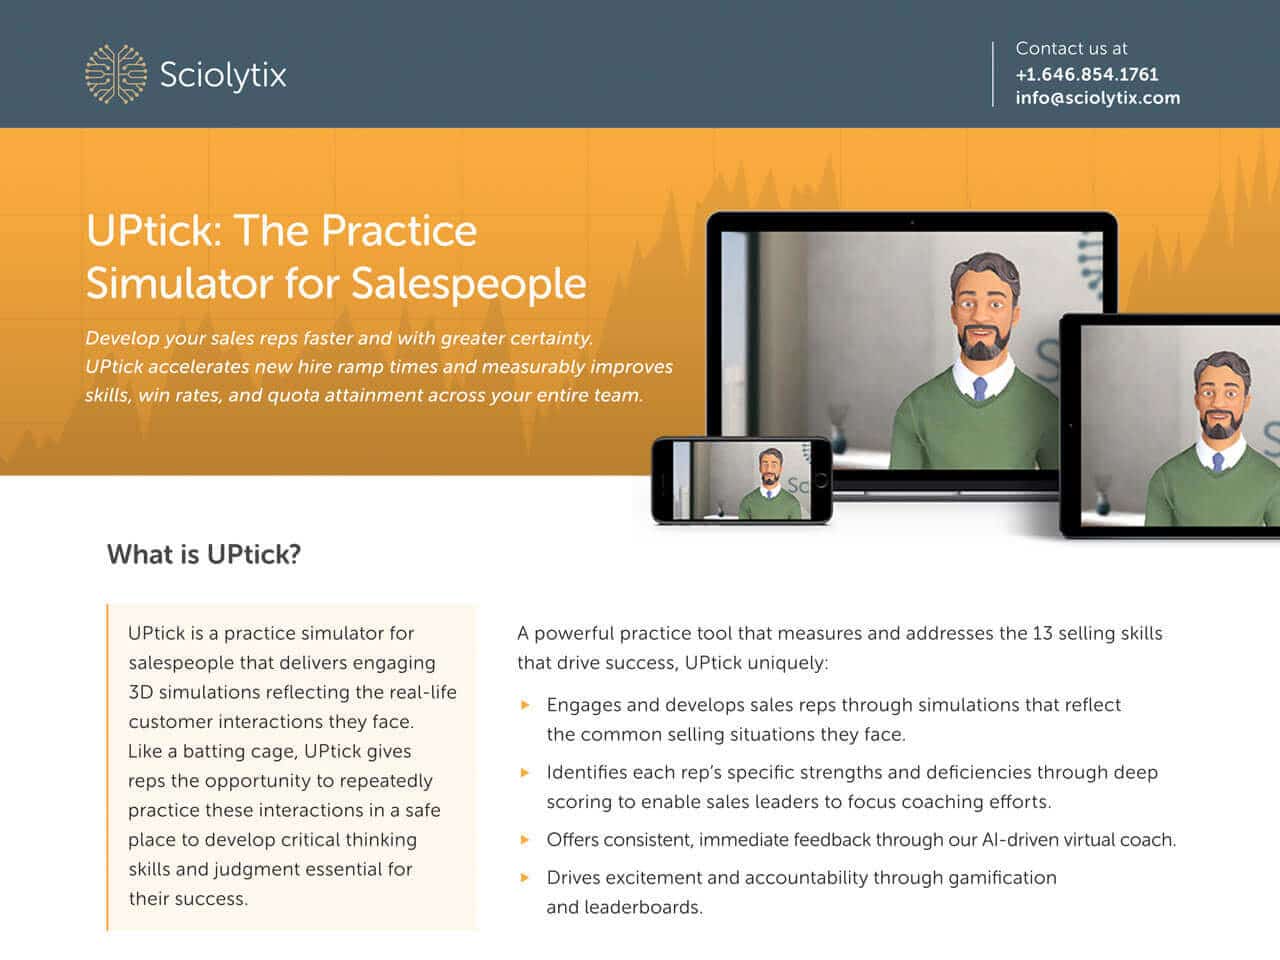 Uptick: The Practice Simulator for Salespeople